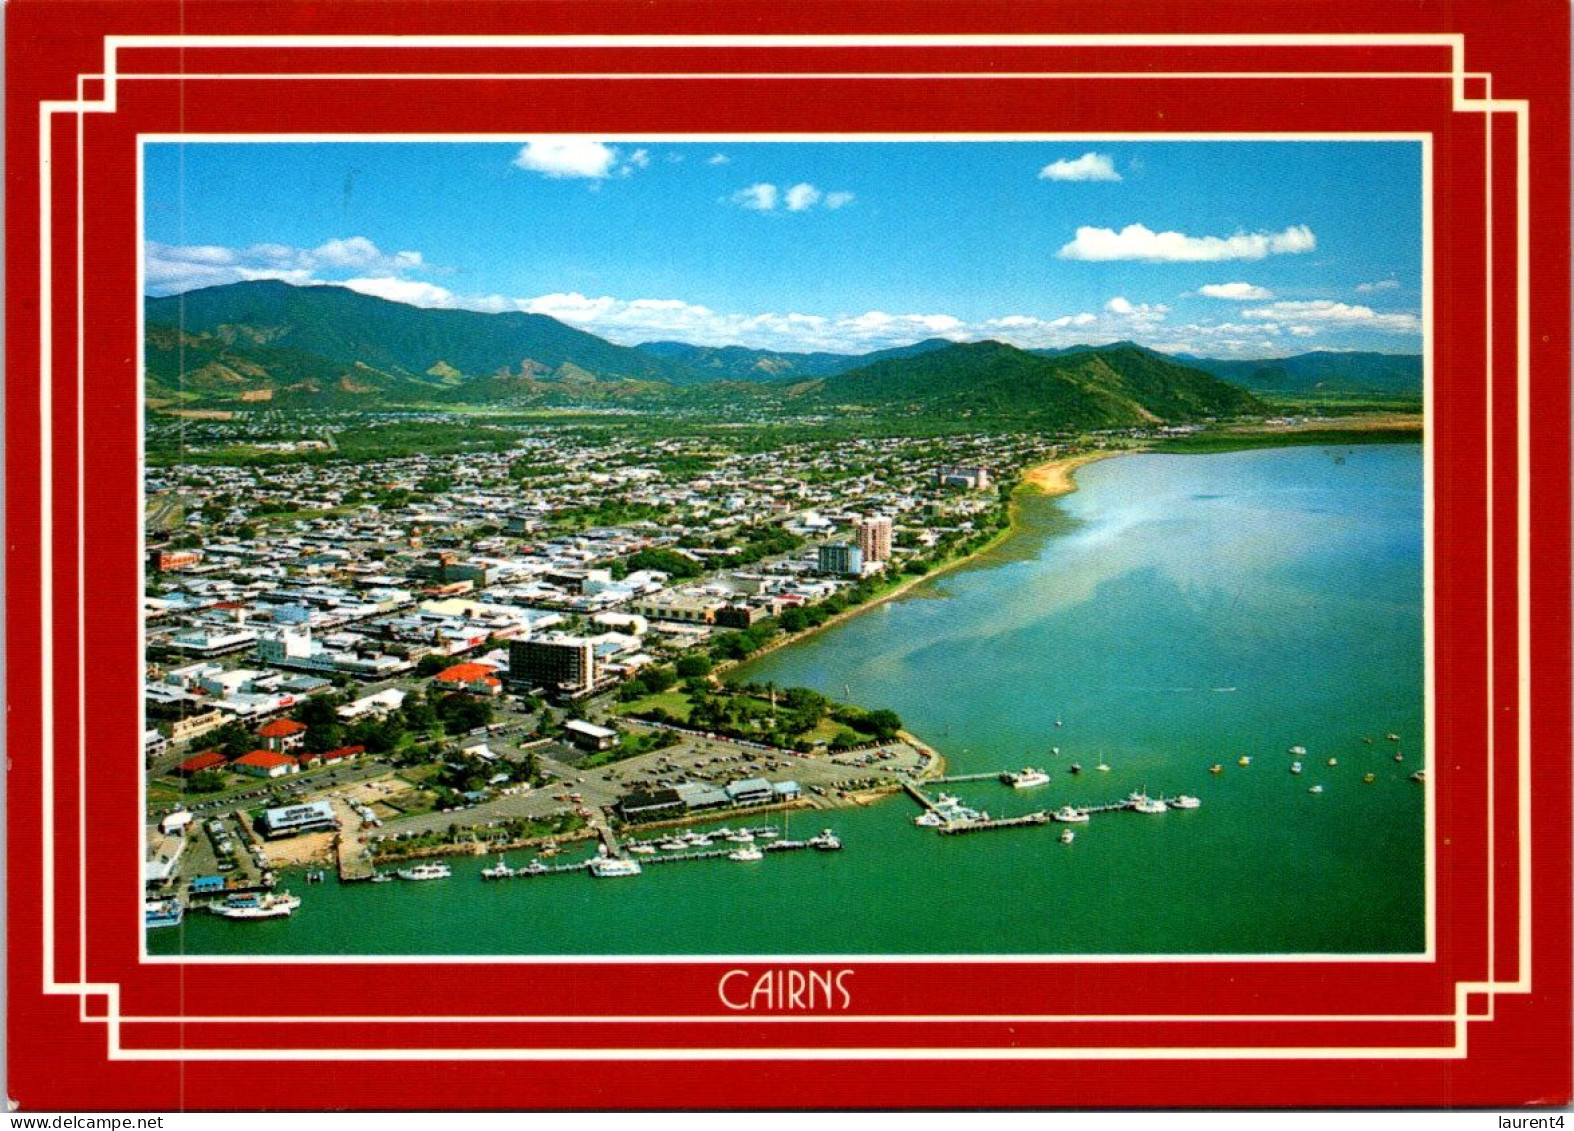 10-5-2024 (4 Z 36) Australia - QLD - Cairns  (posted With Leafy Sea Dragon Stamp) - Cairns